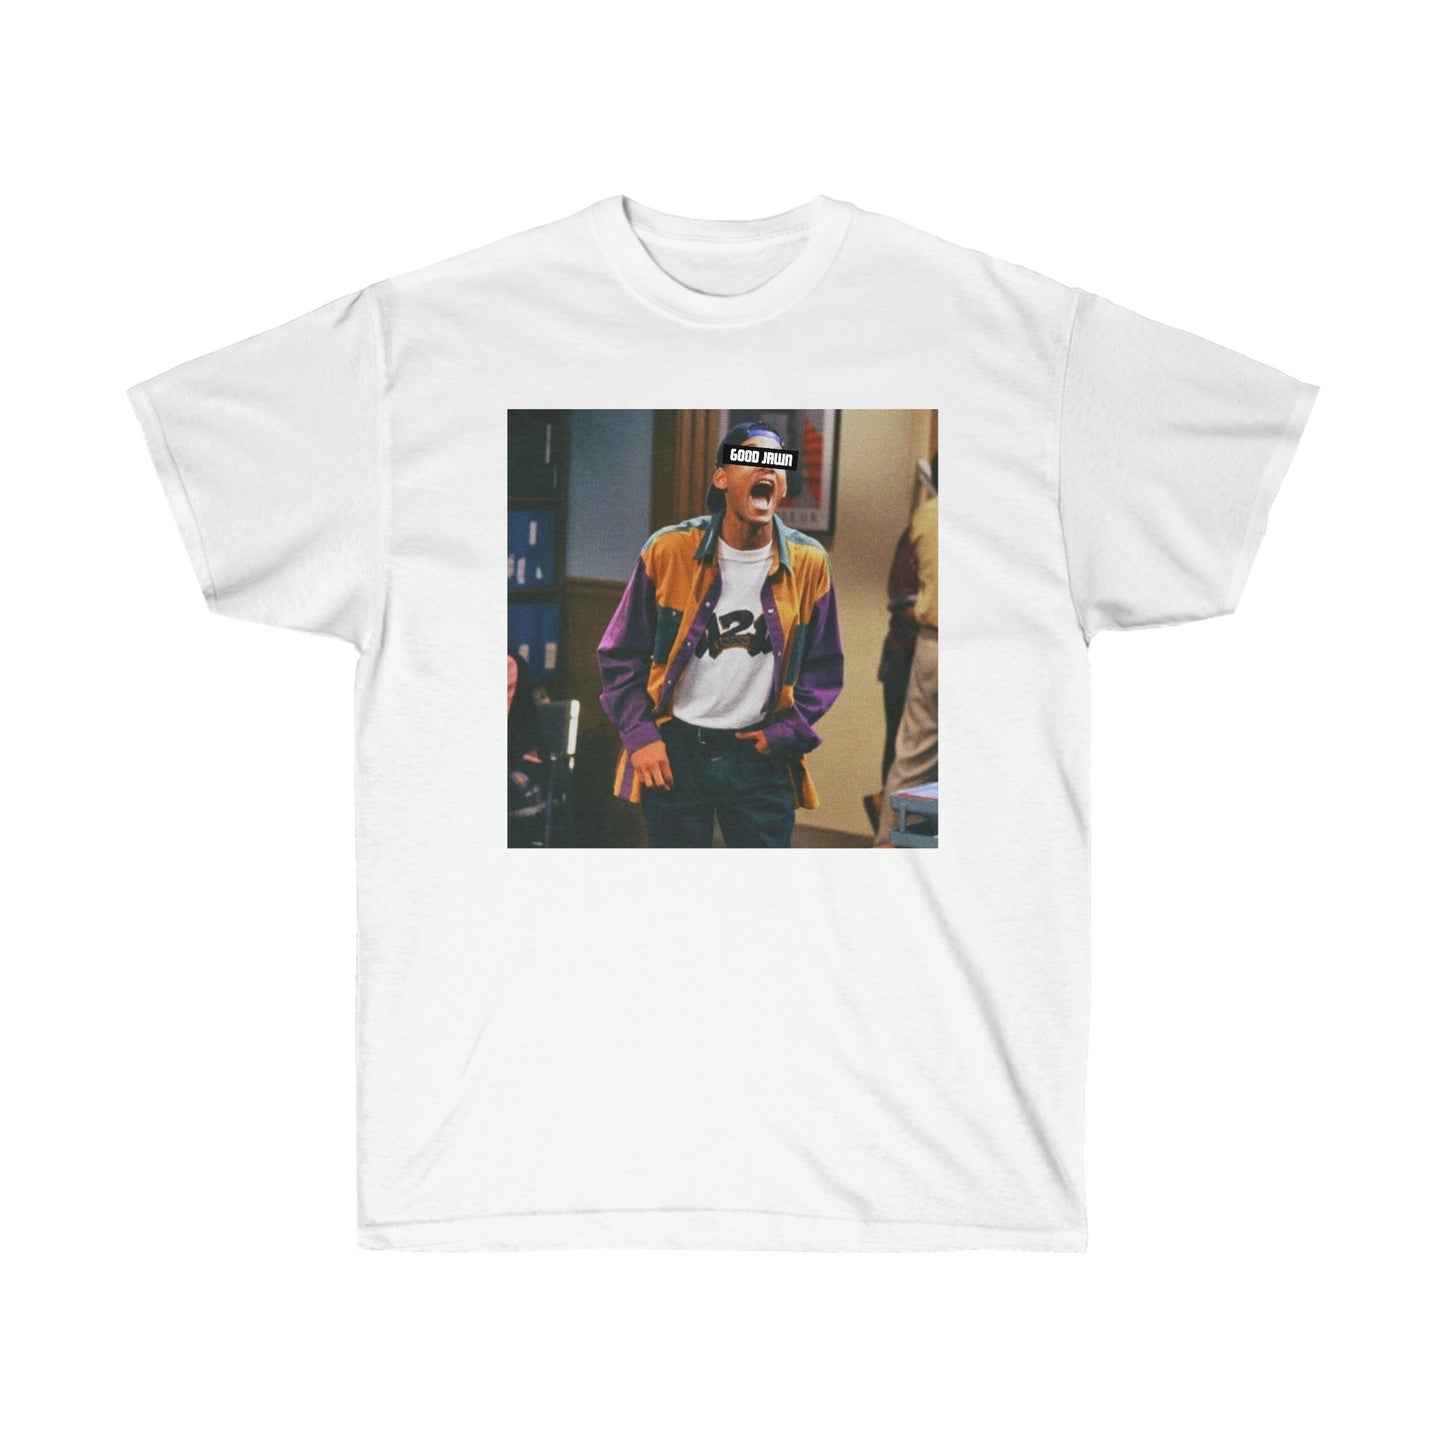 Good Jawn (Will Smith) Tee